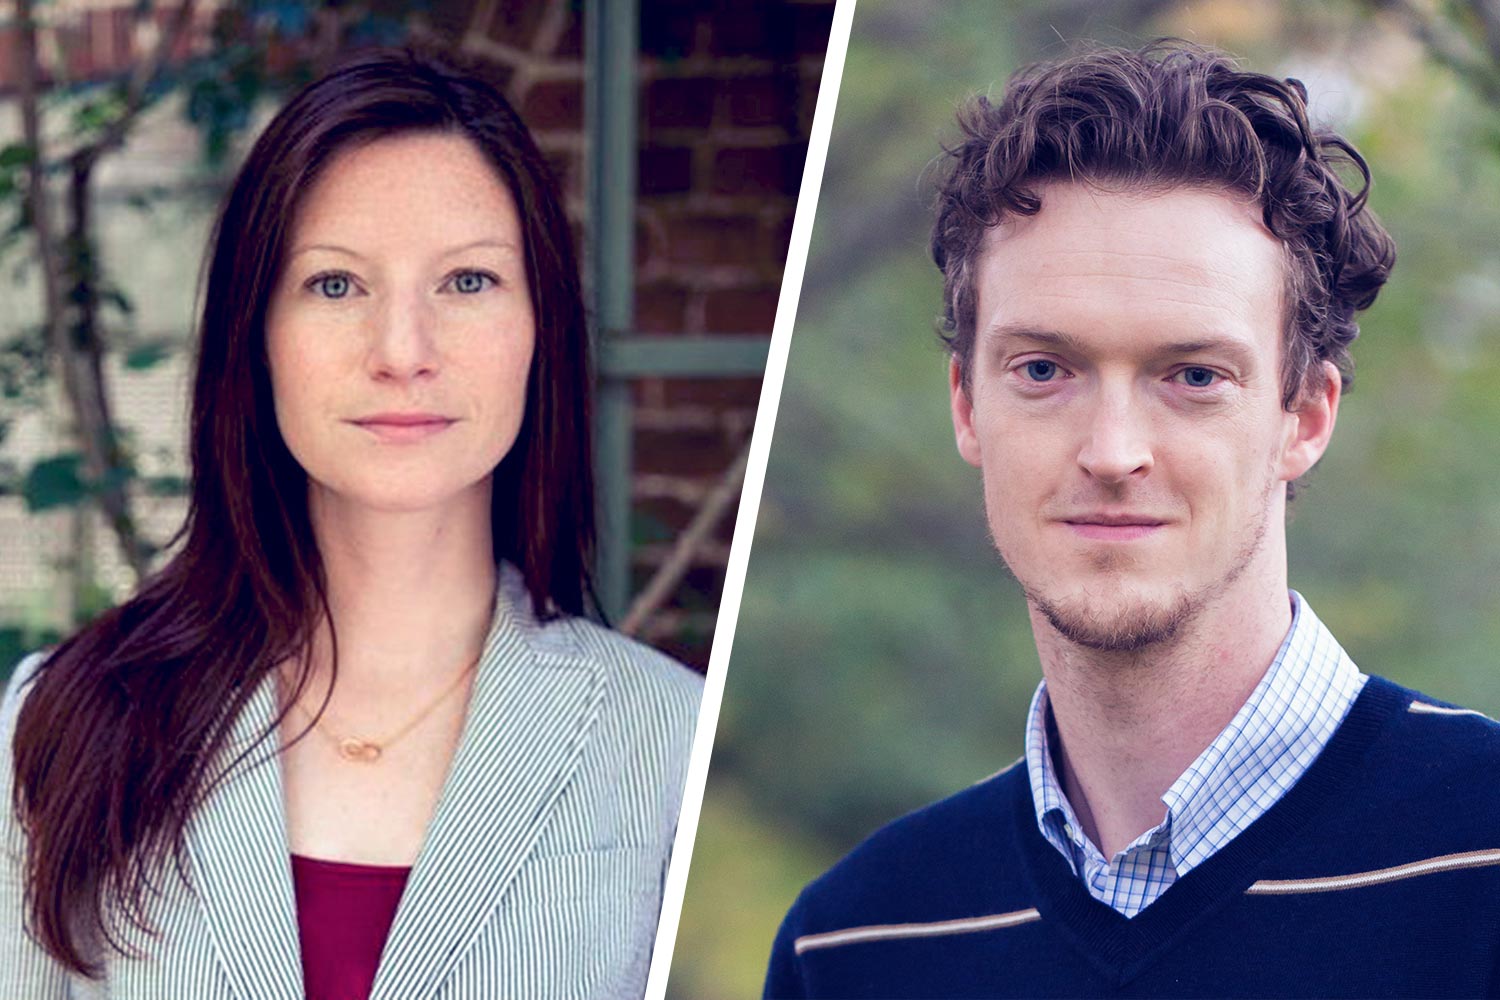 Christine Mahoney, left, and Phillip Potter of the Batten School of Leadership and Public Policy are this year’s UVA nominees for Carnegie Fellowships.